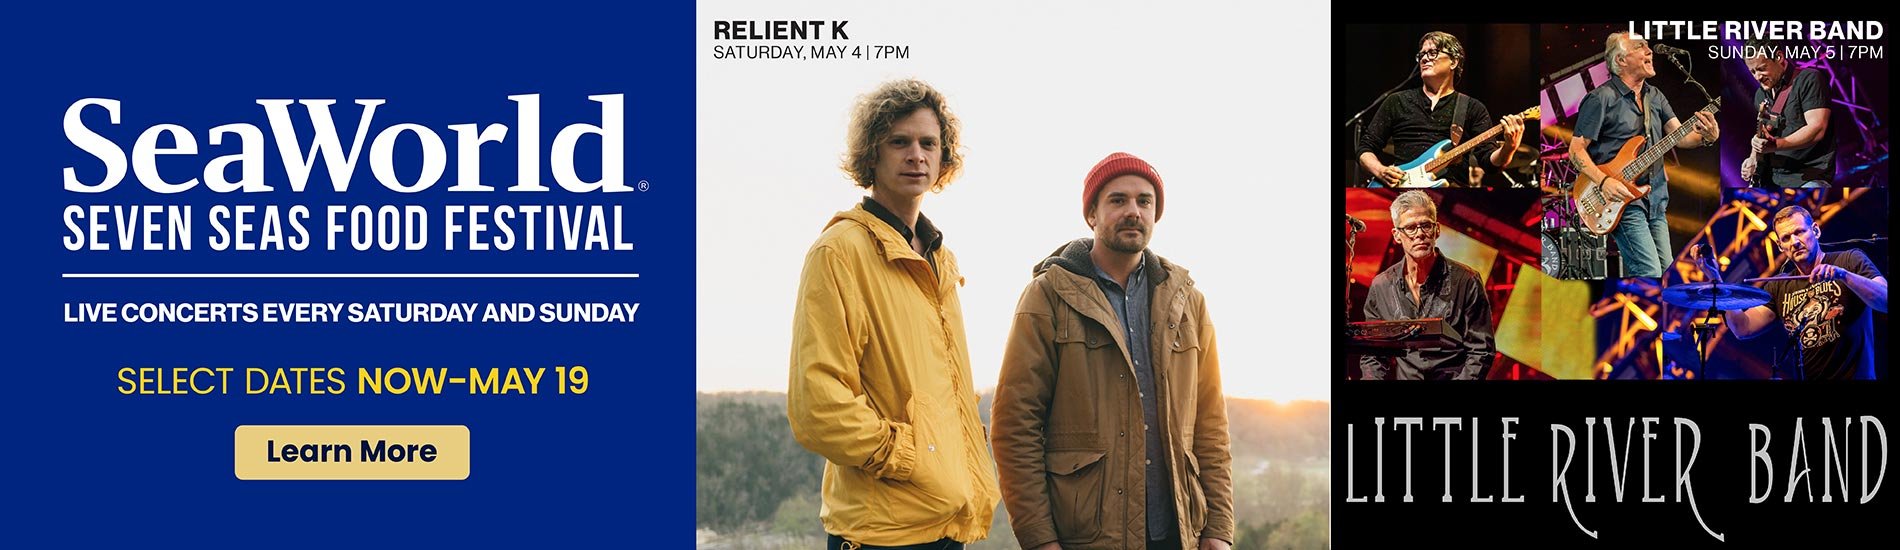 Relient K and Little River Band performing at SeaWorld Seven Seas event